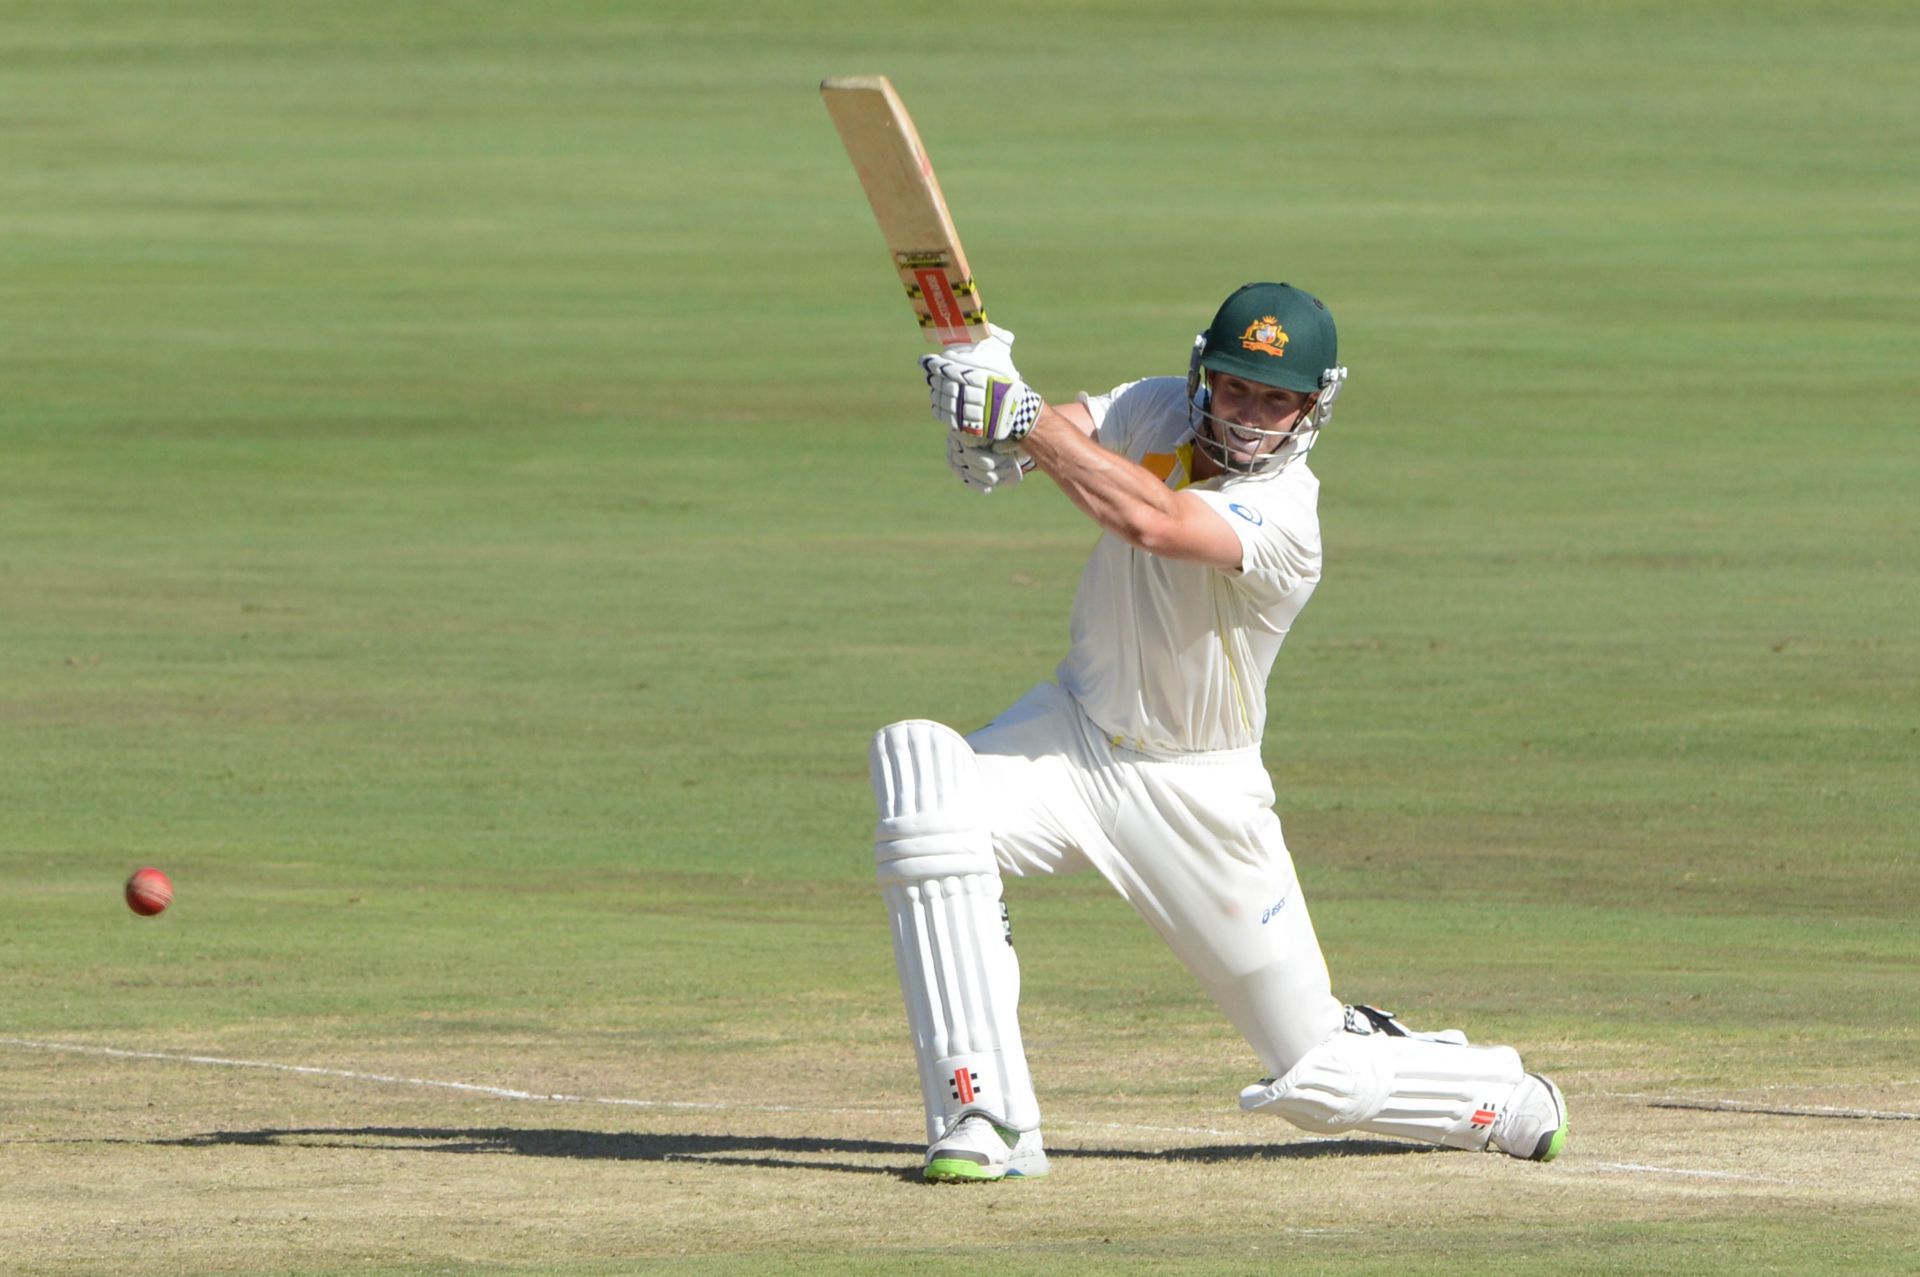 South Africa v Australia - First Test: Day 1 (Image: Getty)